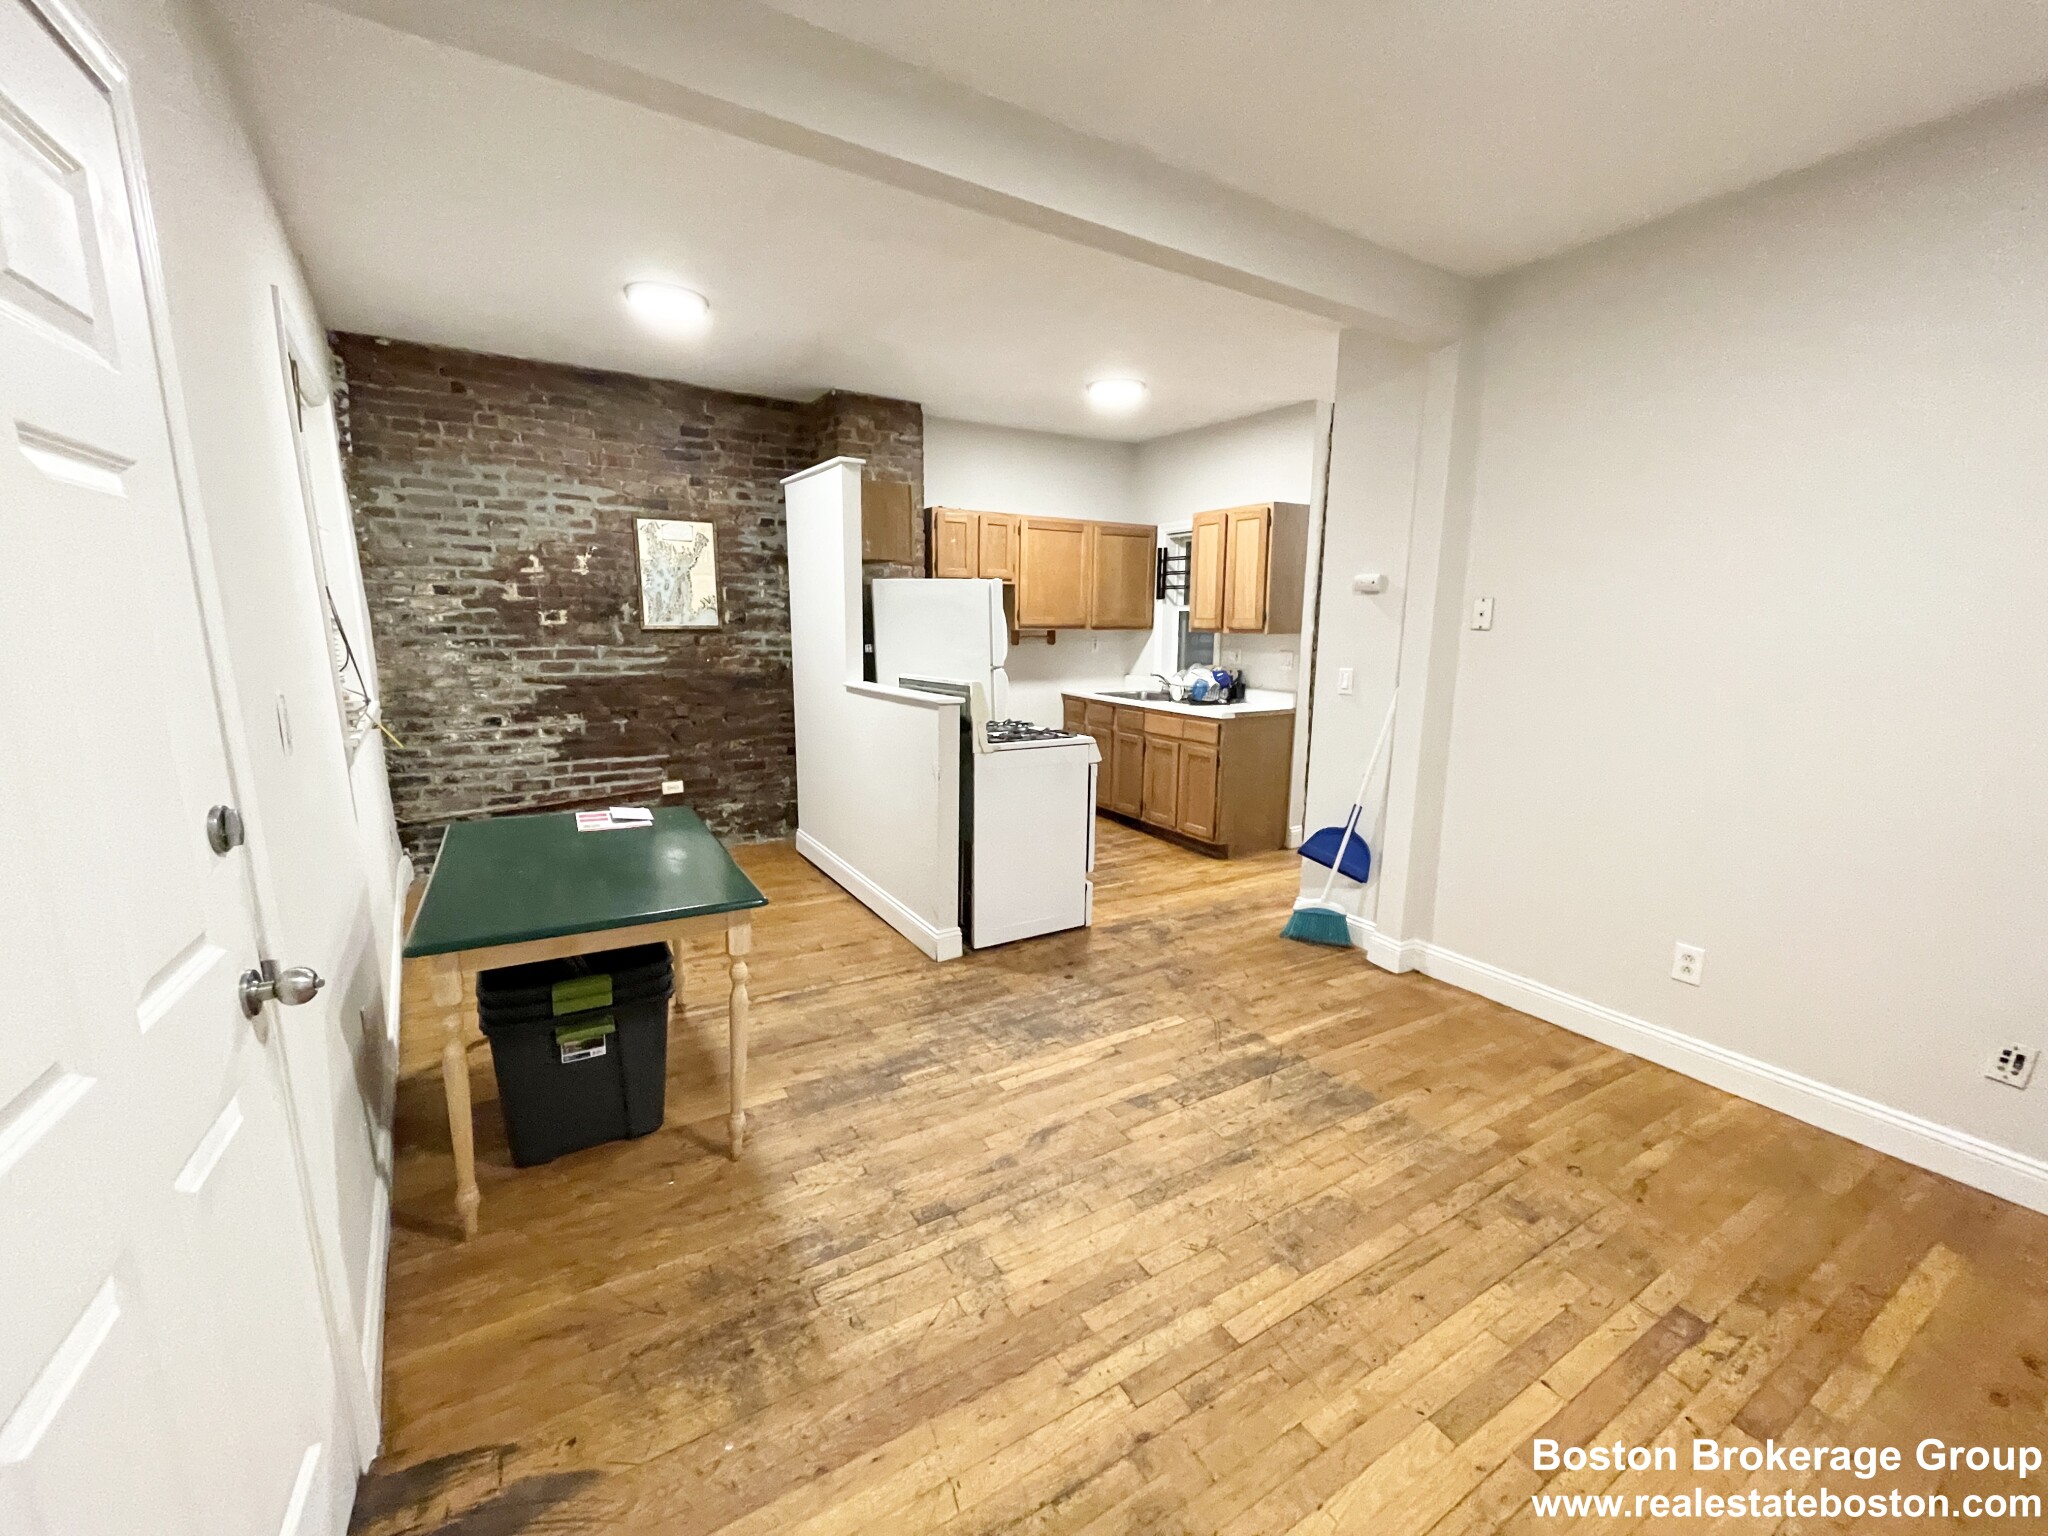 Photos of apartment on Parker St.,Boston MA 02120